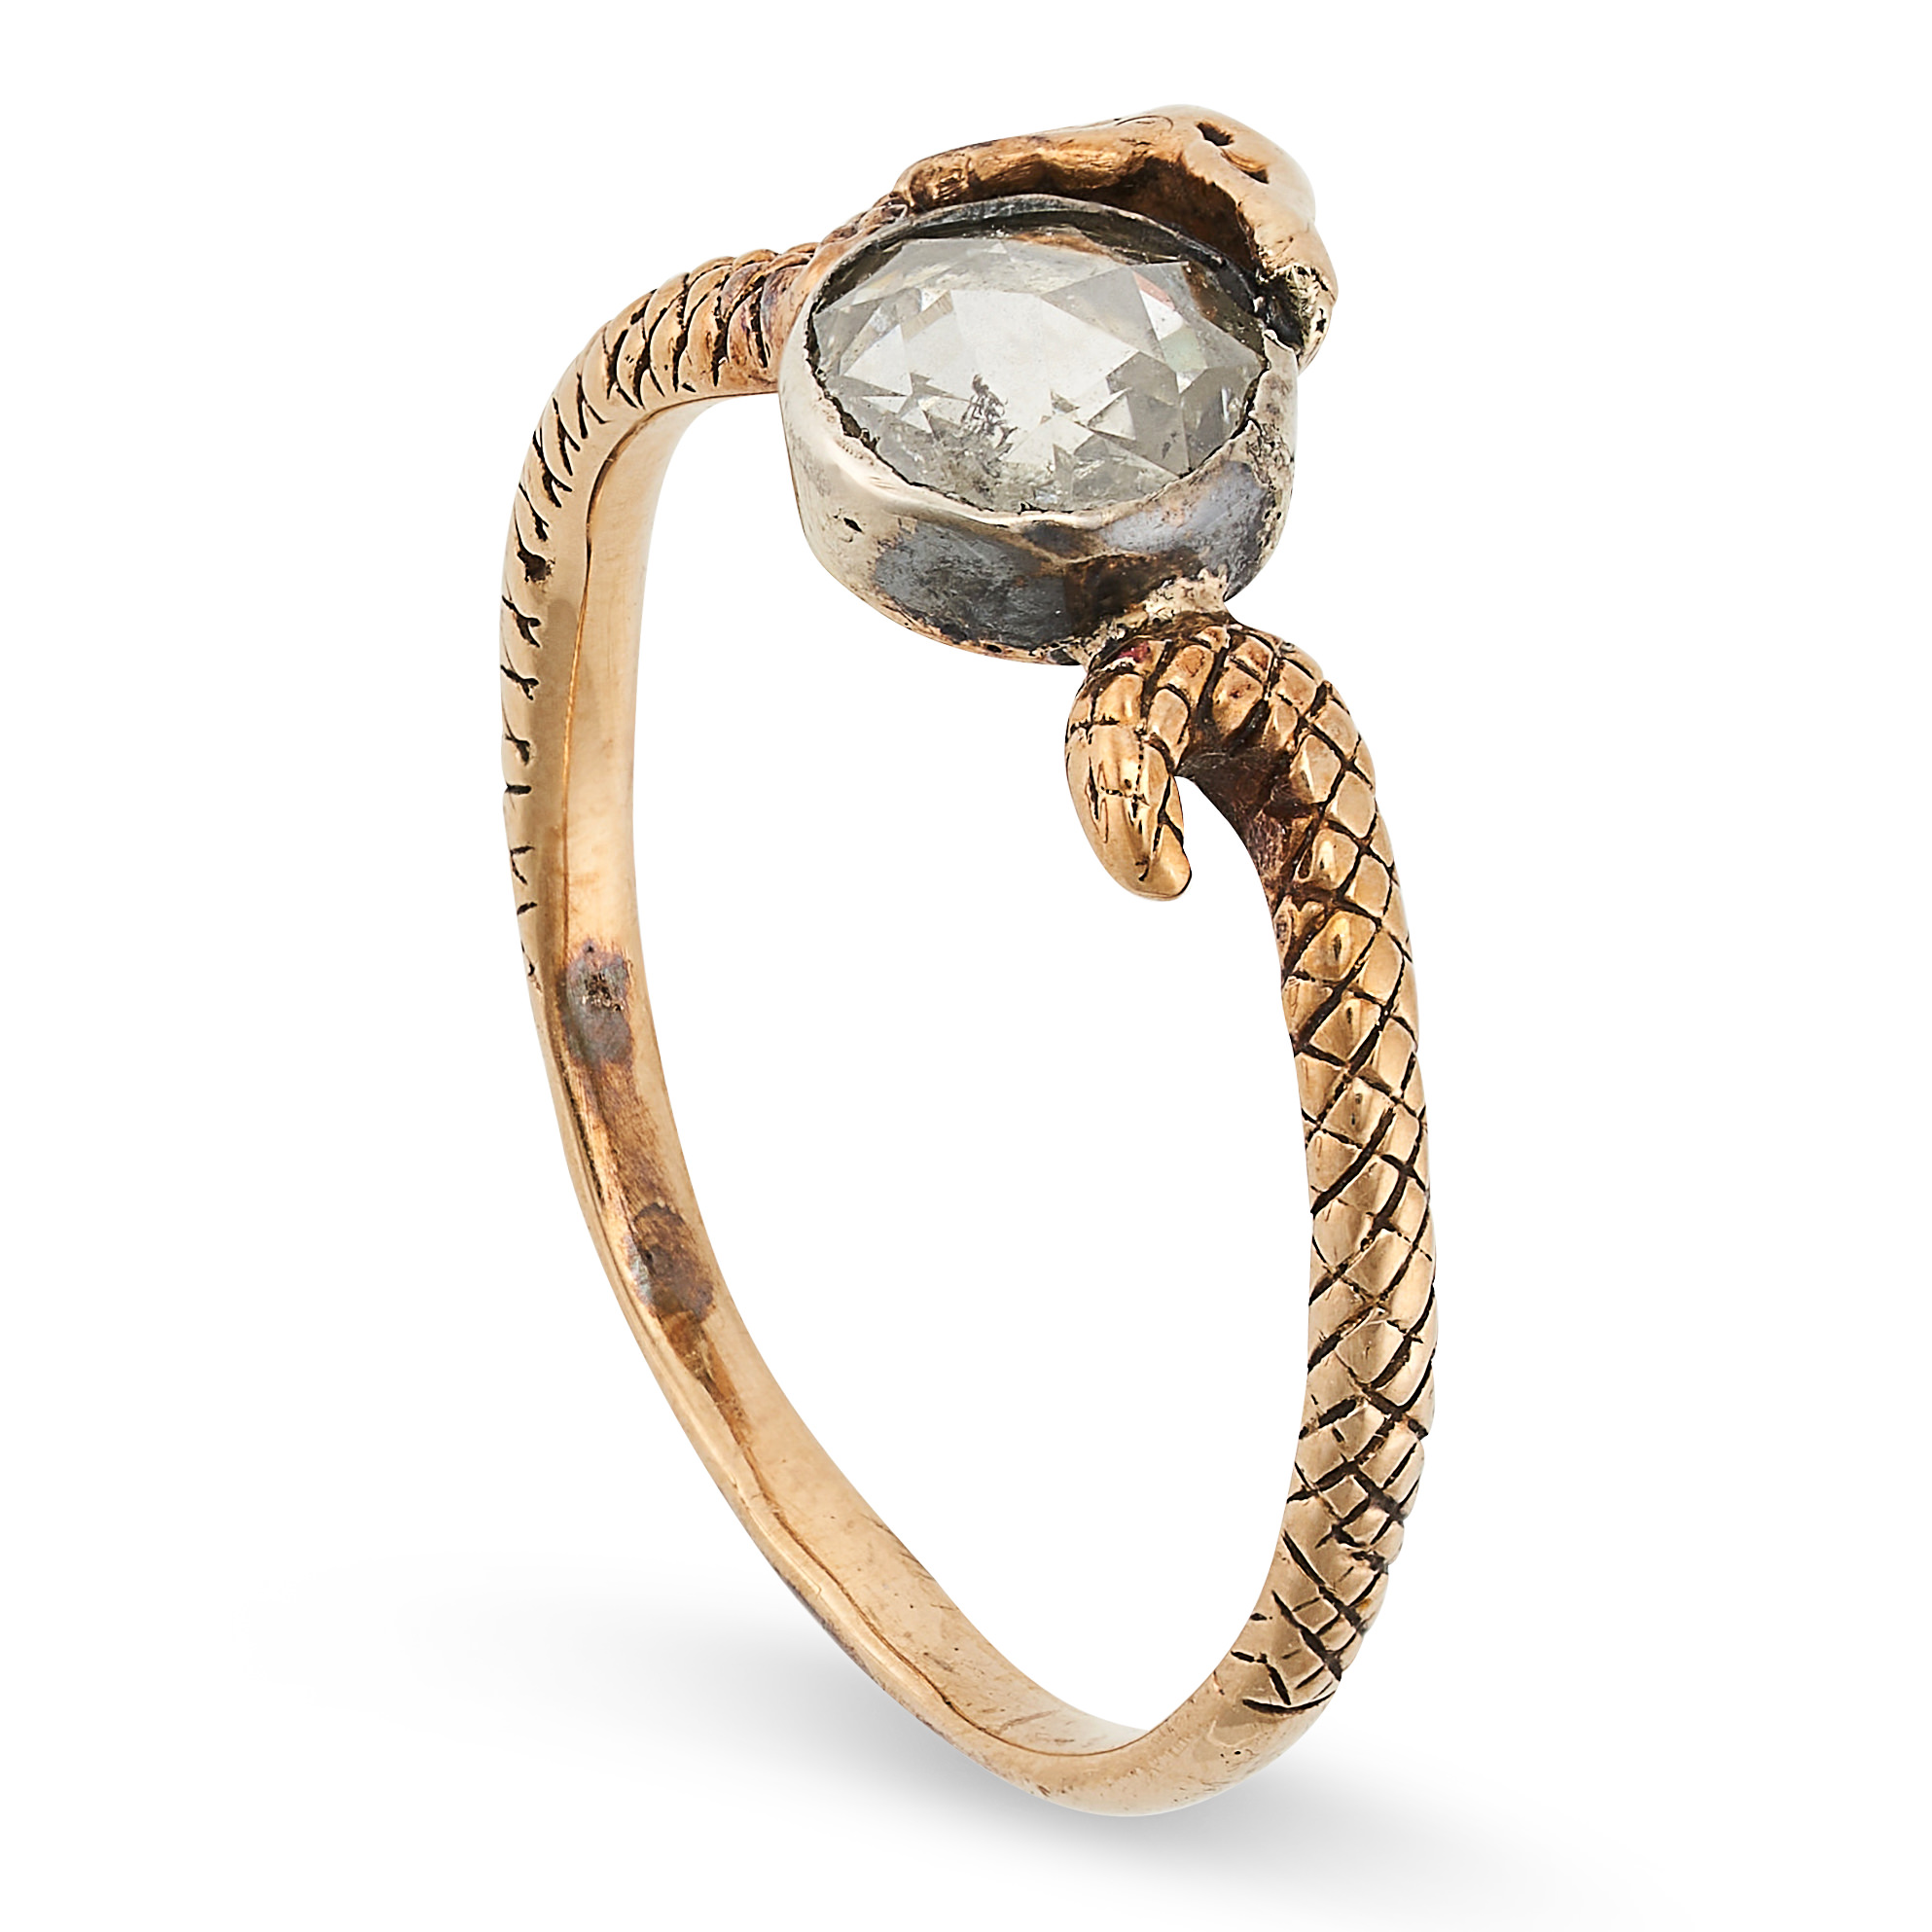 AN ANTIQUE DIAMOND SNAKE RING in yellow gold and silver, designed as a snake coiled around a rose - Image 2 of 2